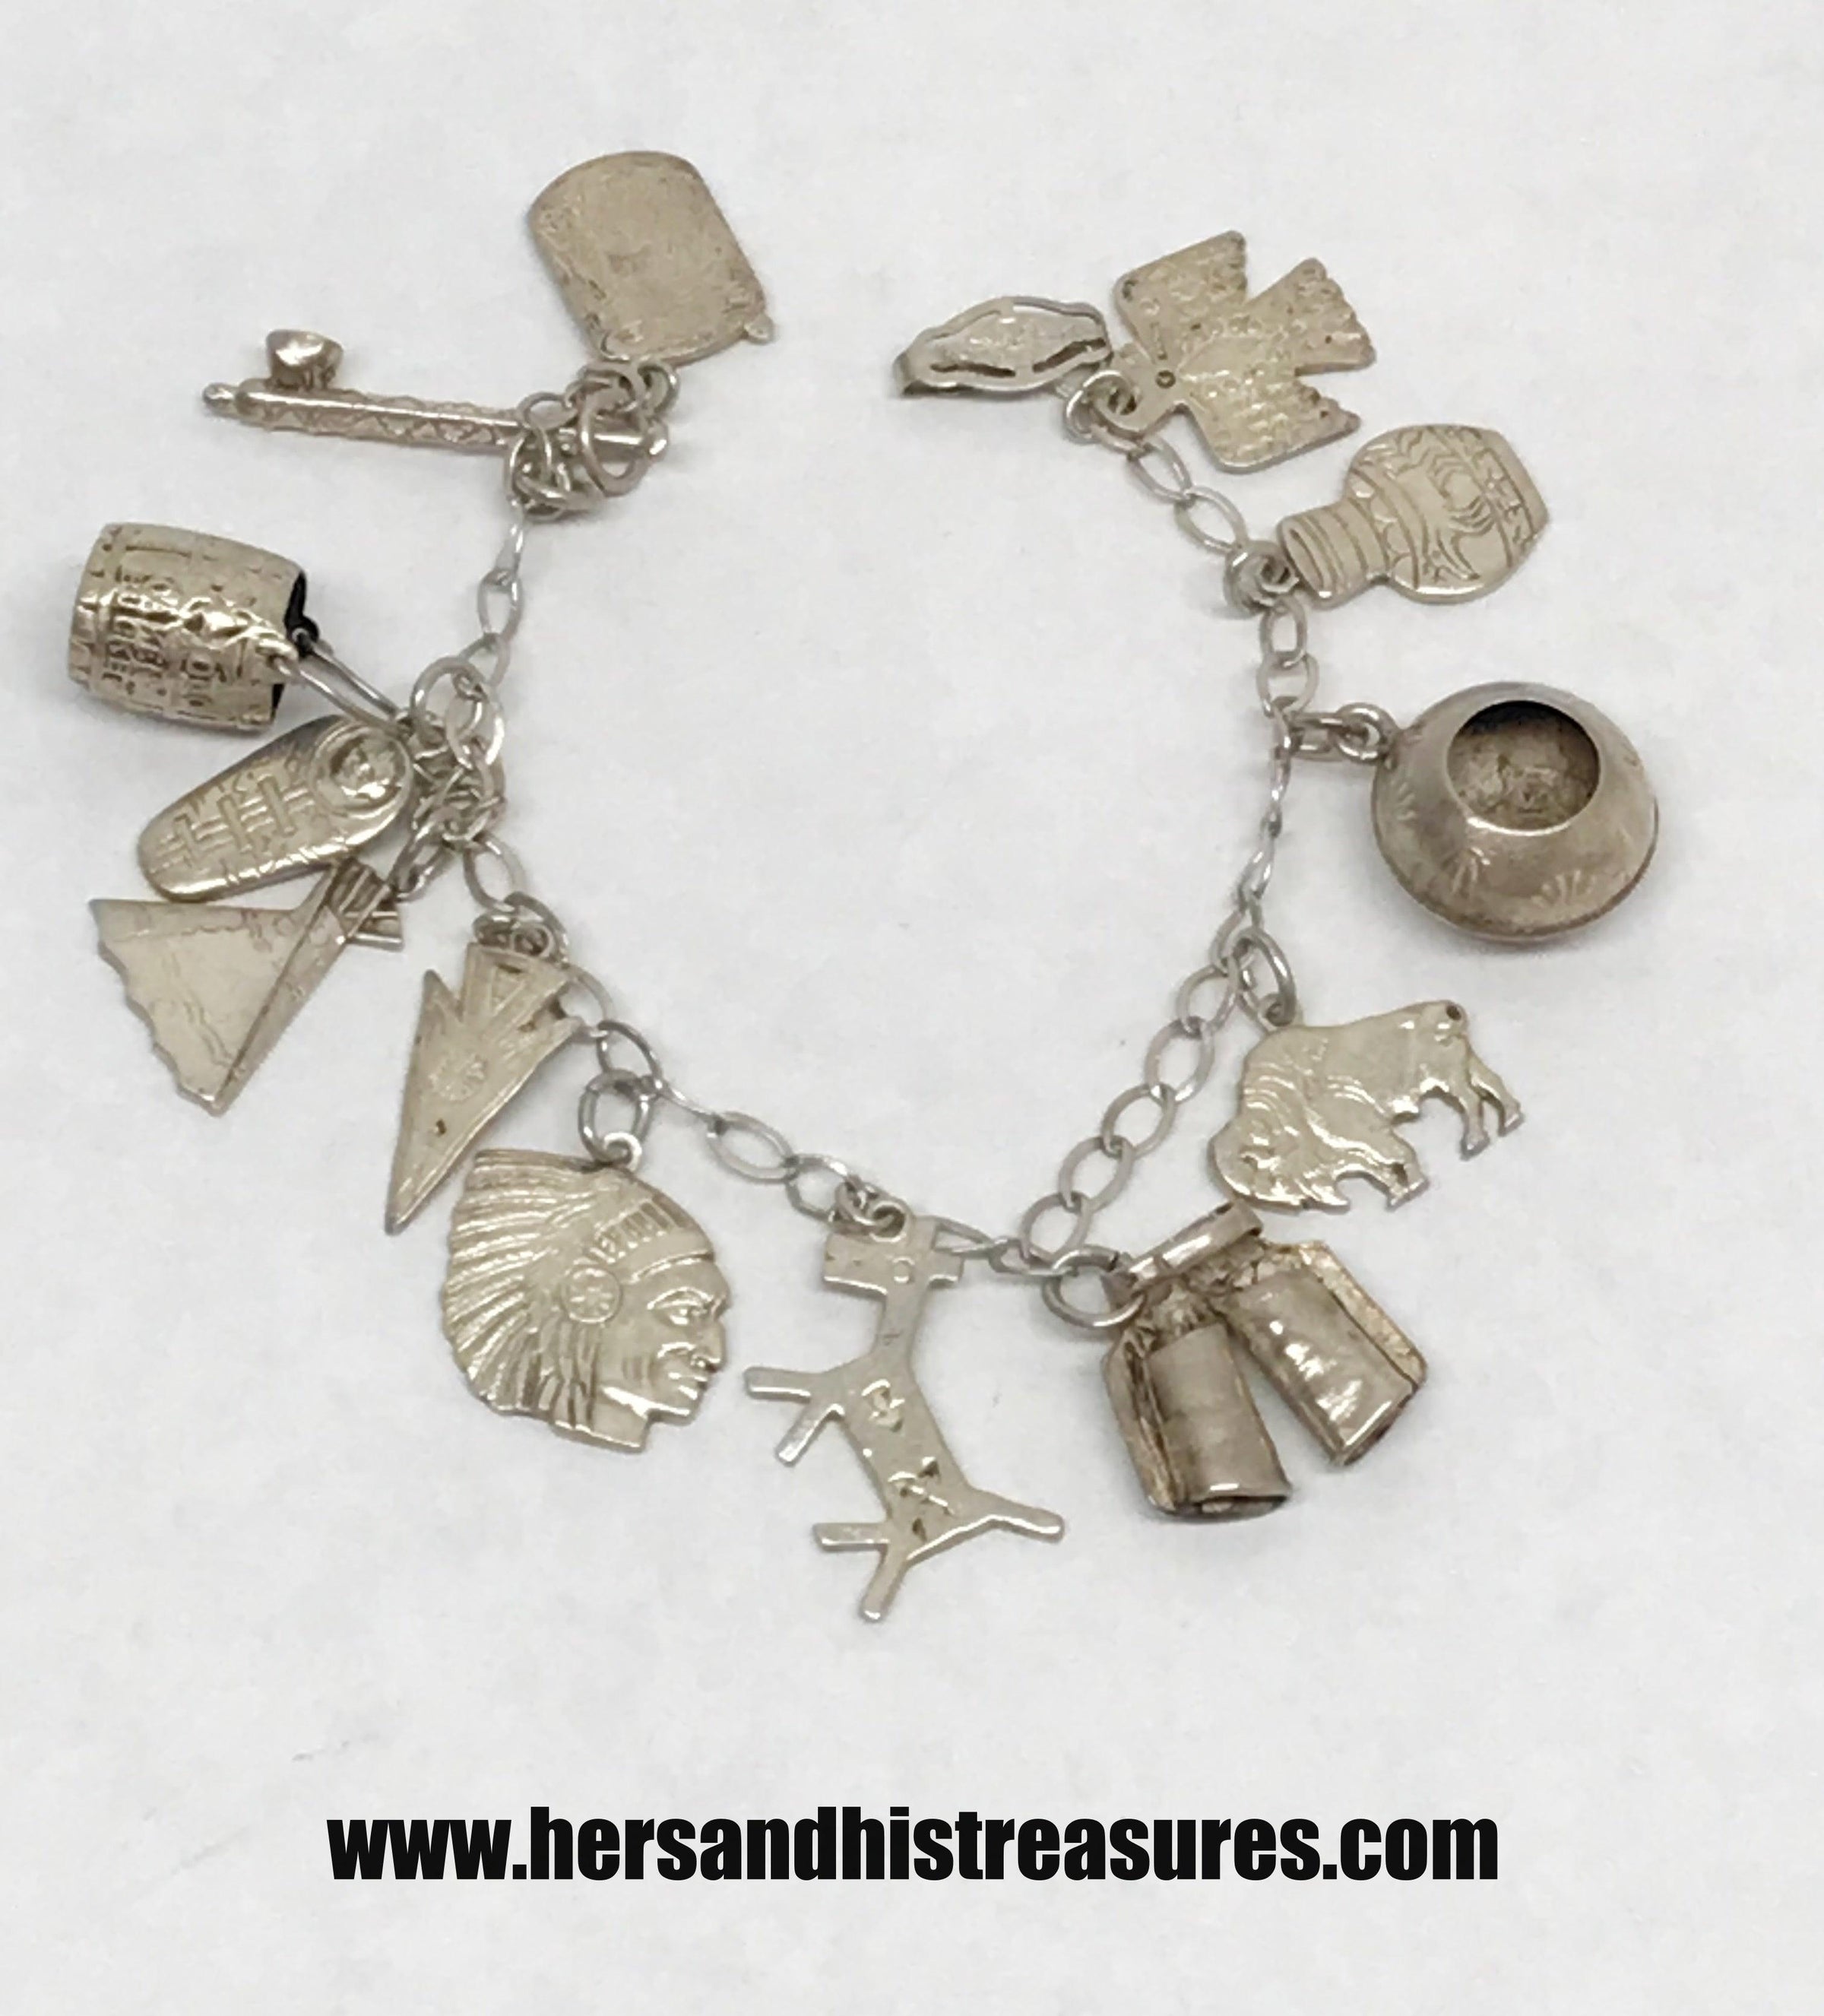 Vintage Mexican Charm Bracelet, 1930s, With Silver Charms